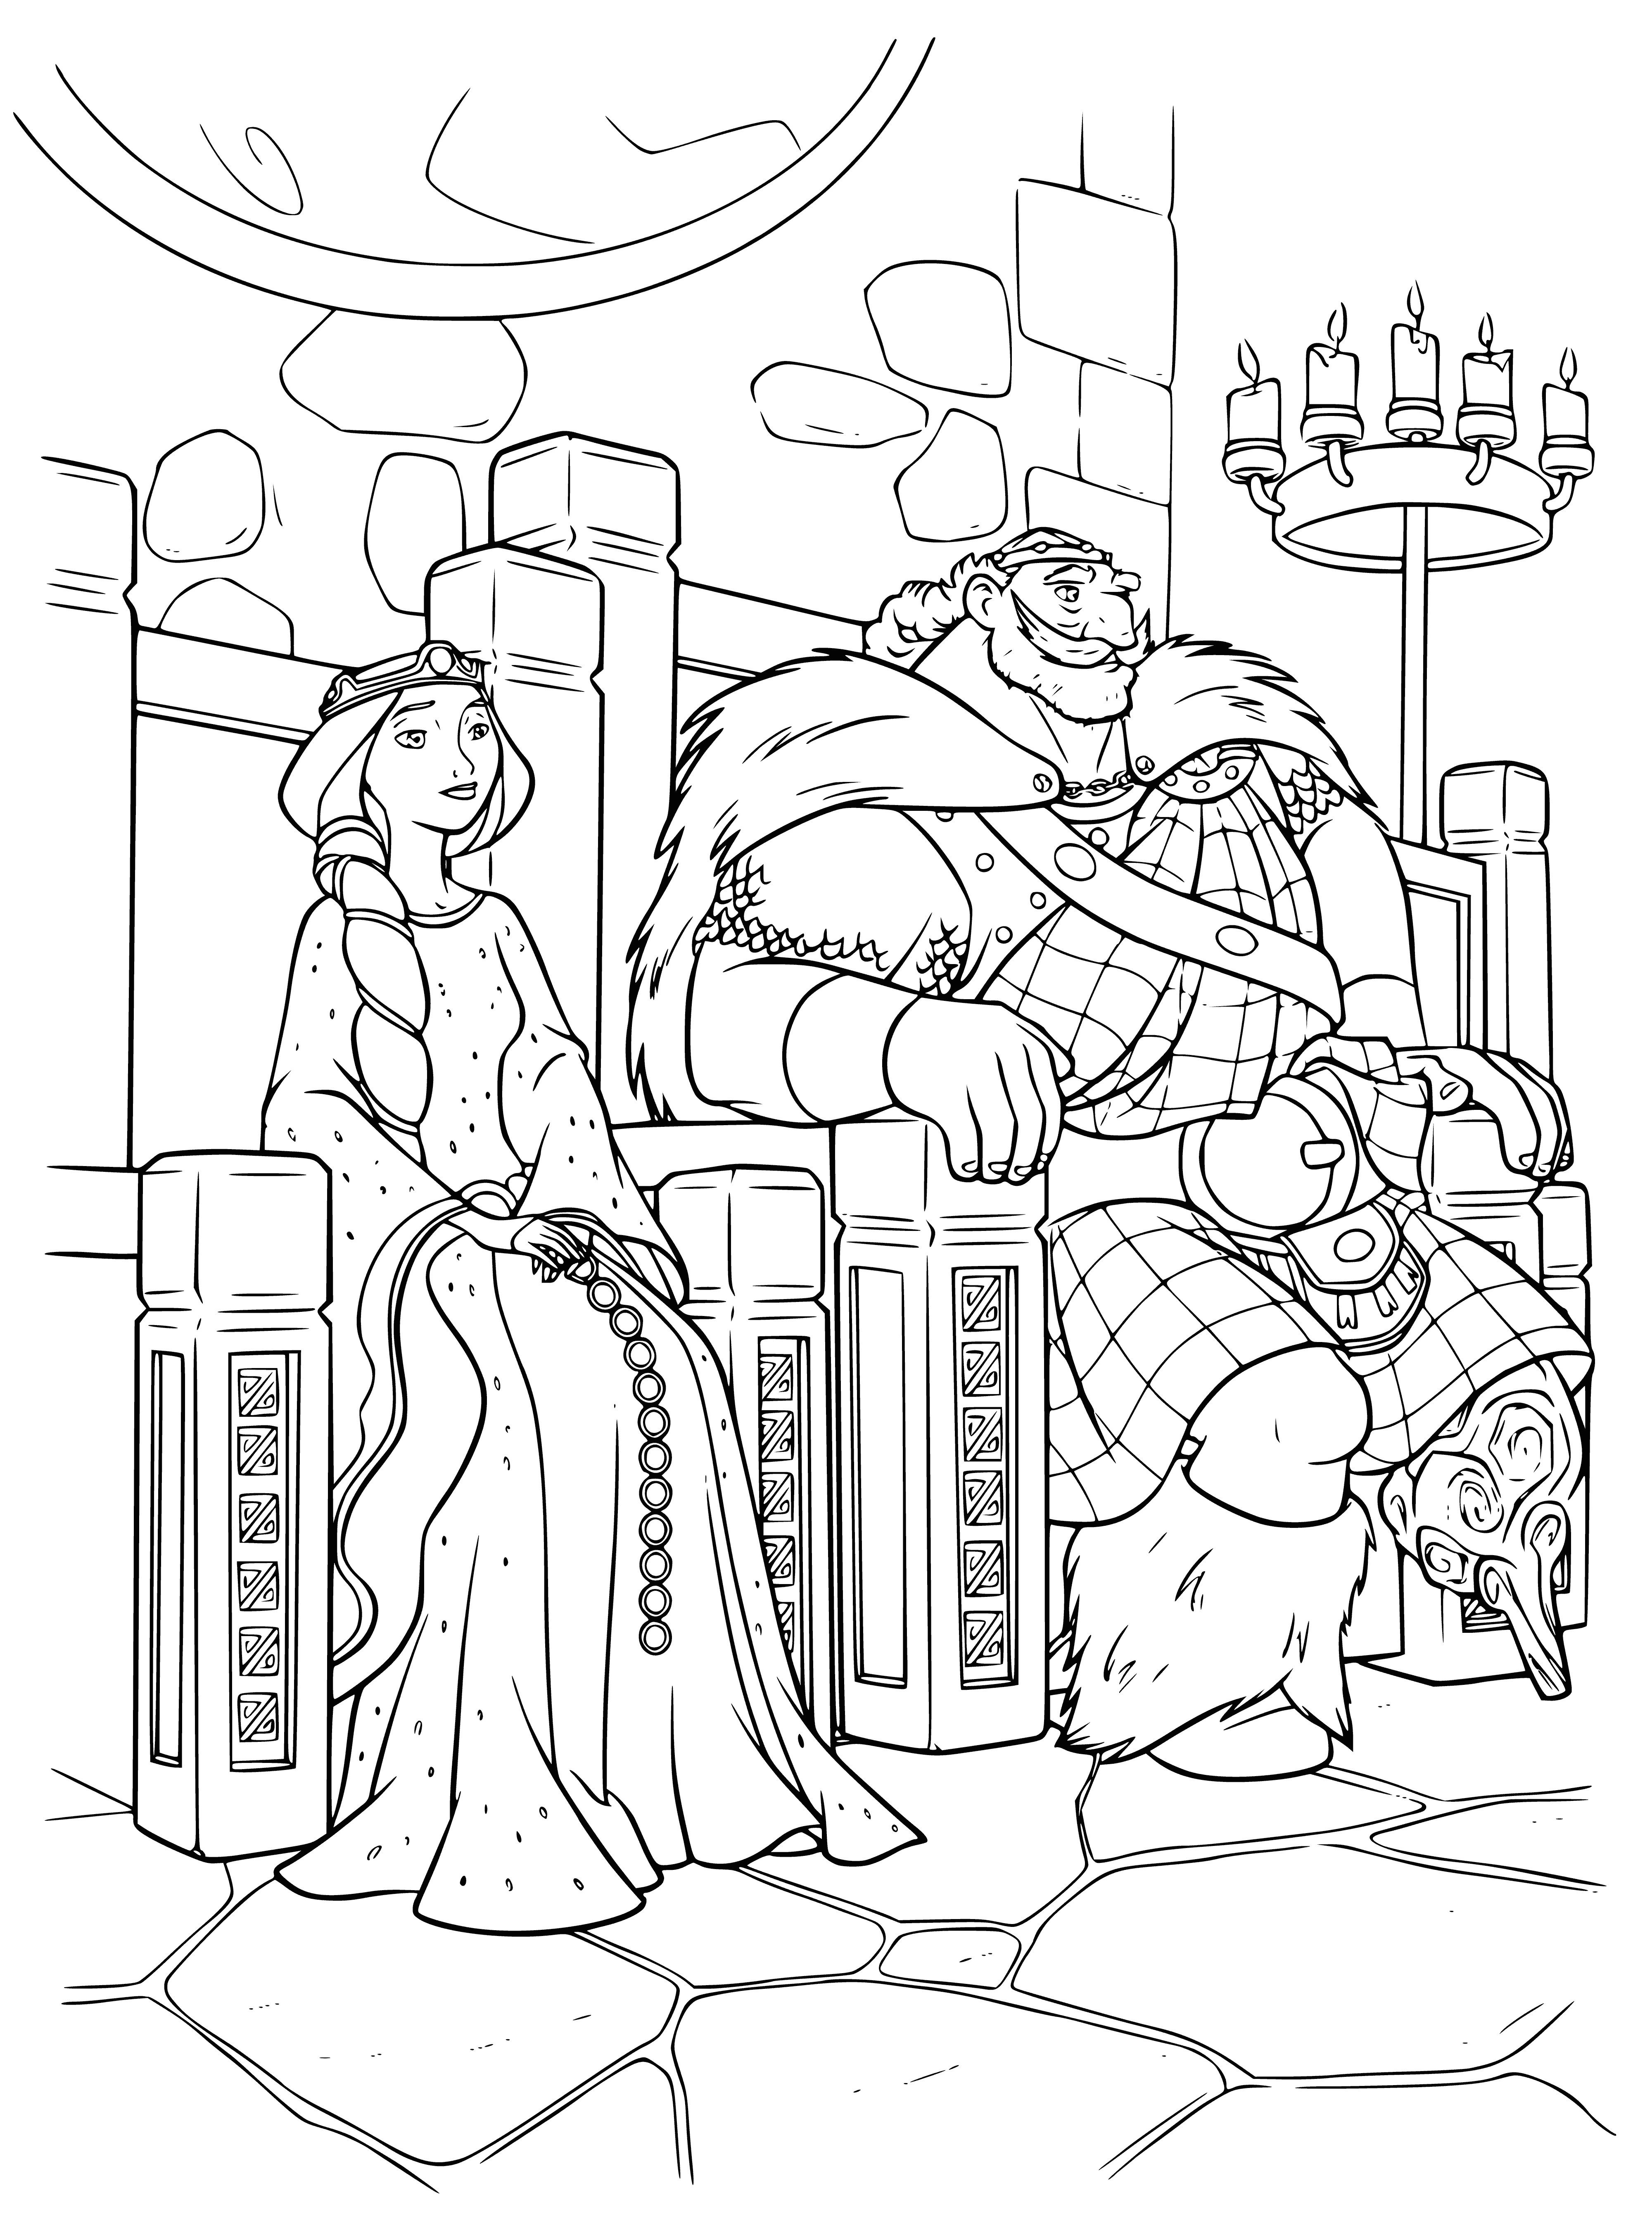 King and queen on thrones coloring page